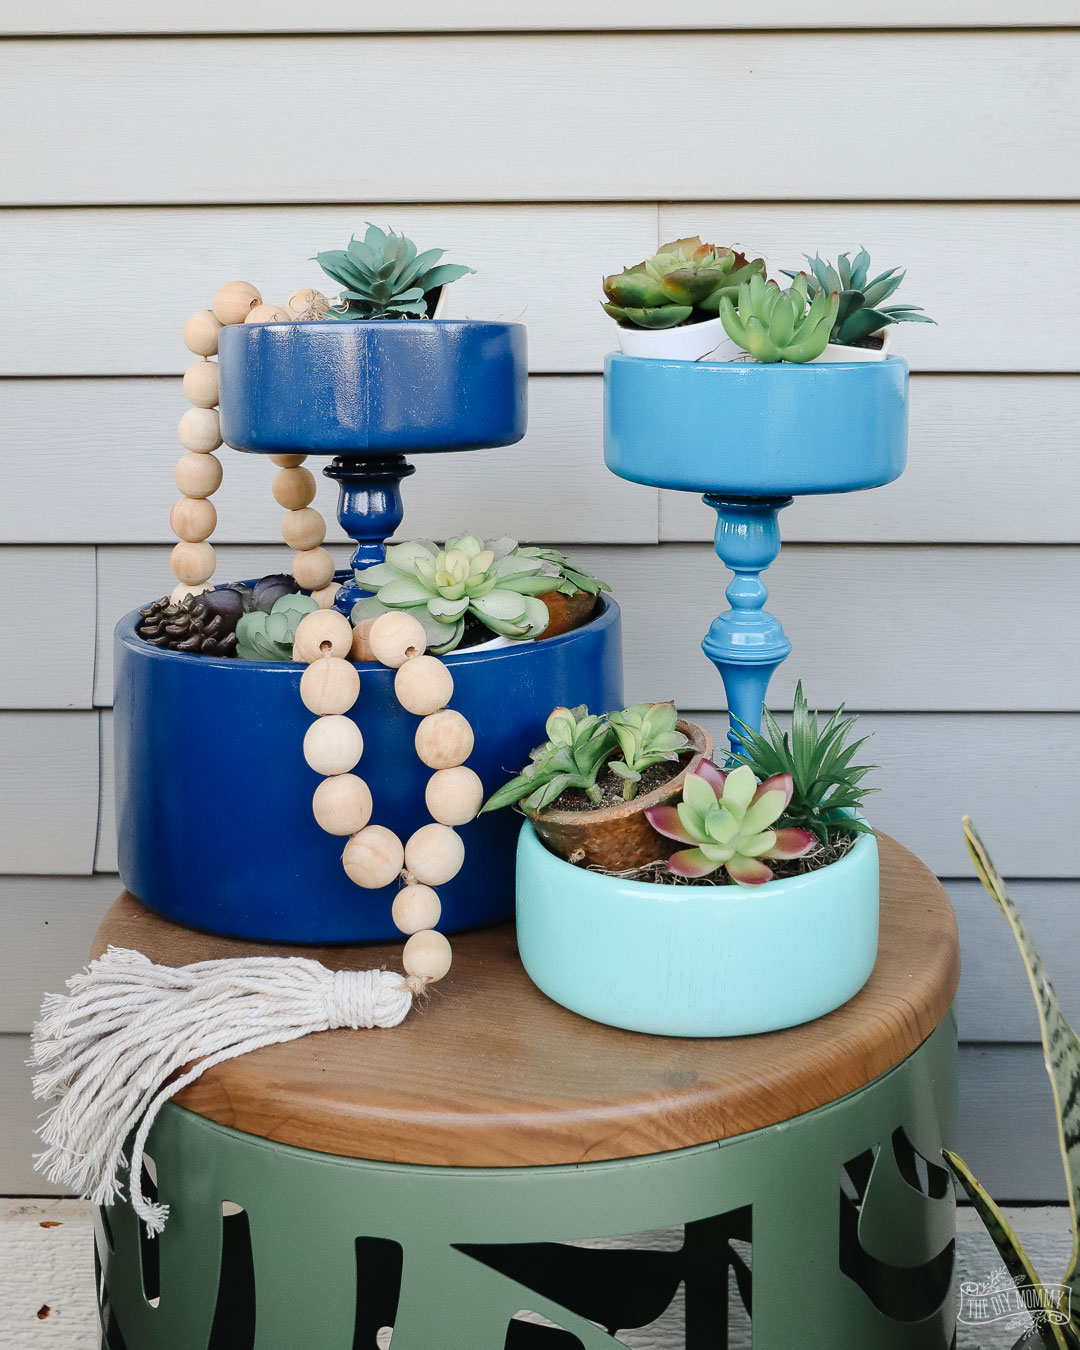 DIY Tiered Tray from Thrifted Wooden Bowls & Candlesticks